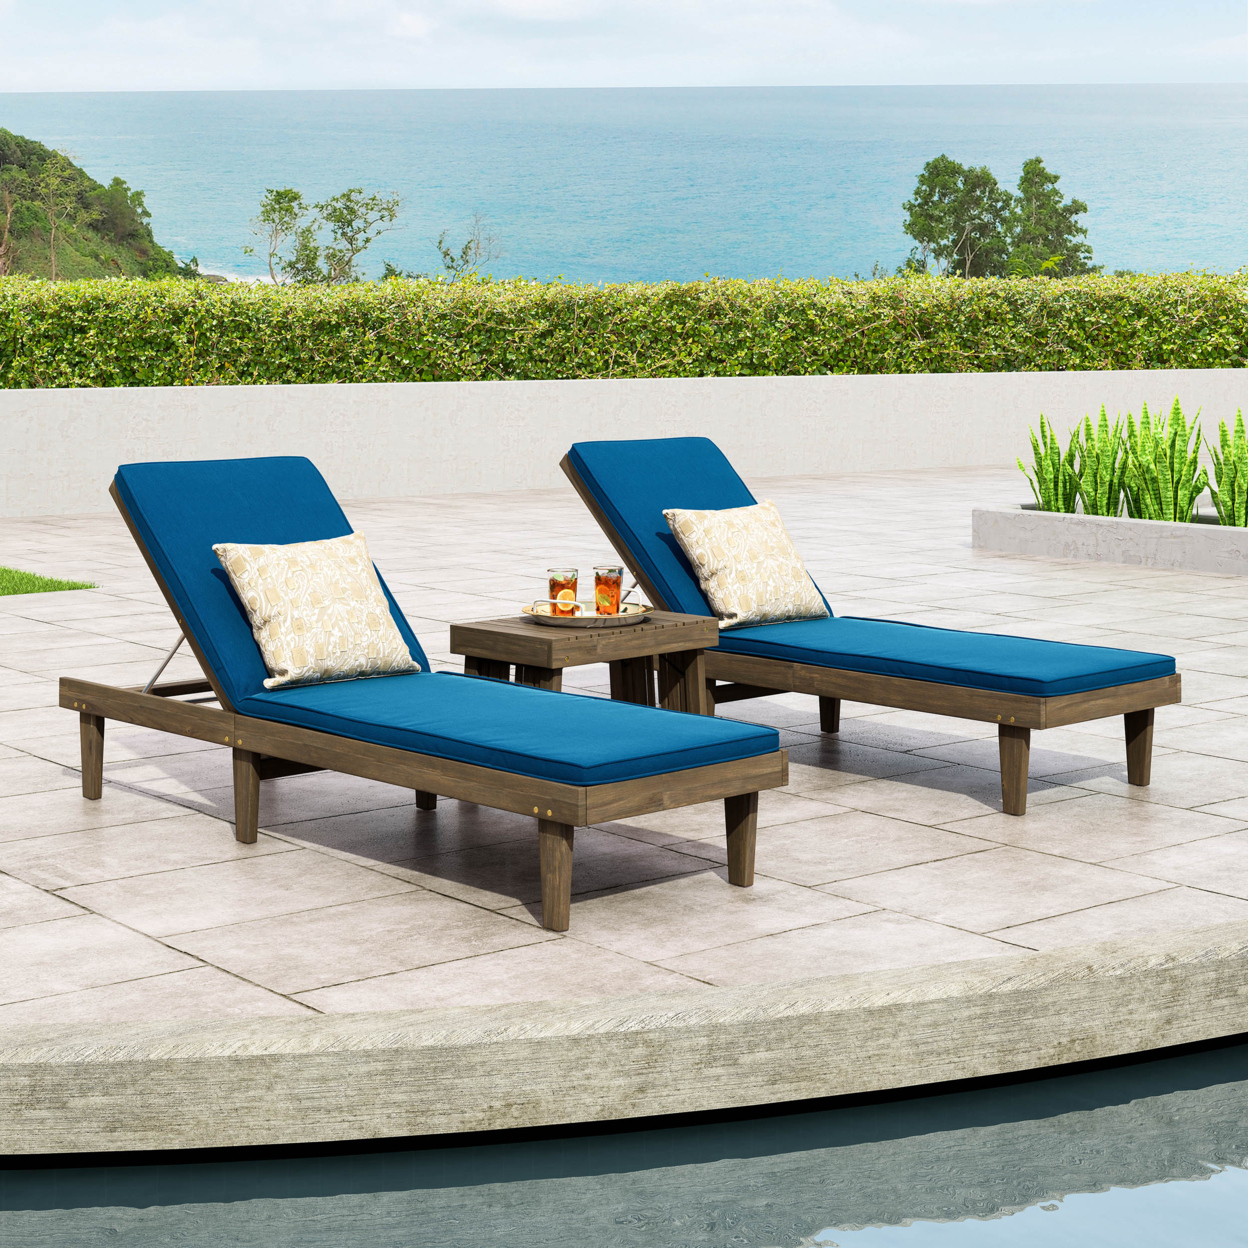 Addisyn Outdoor Acacia Wood 3 Piece Chaise Lounge Set With Water-Resistant Cushions - Gray/cream